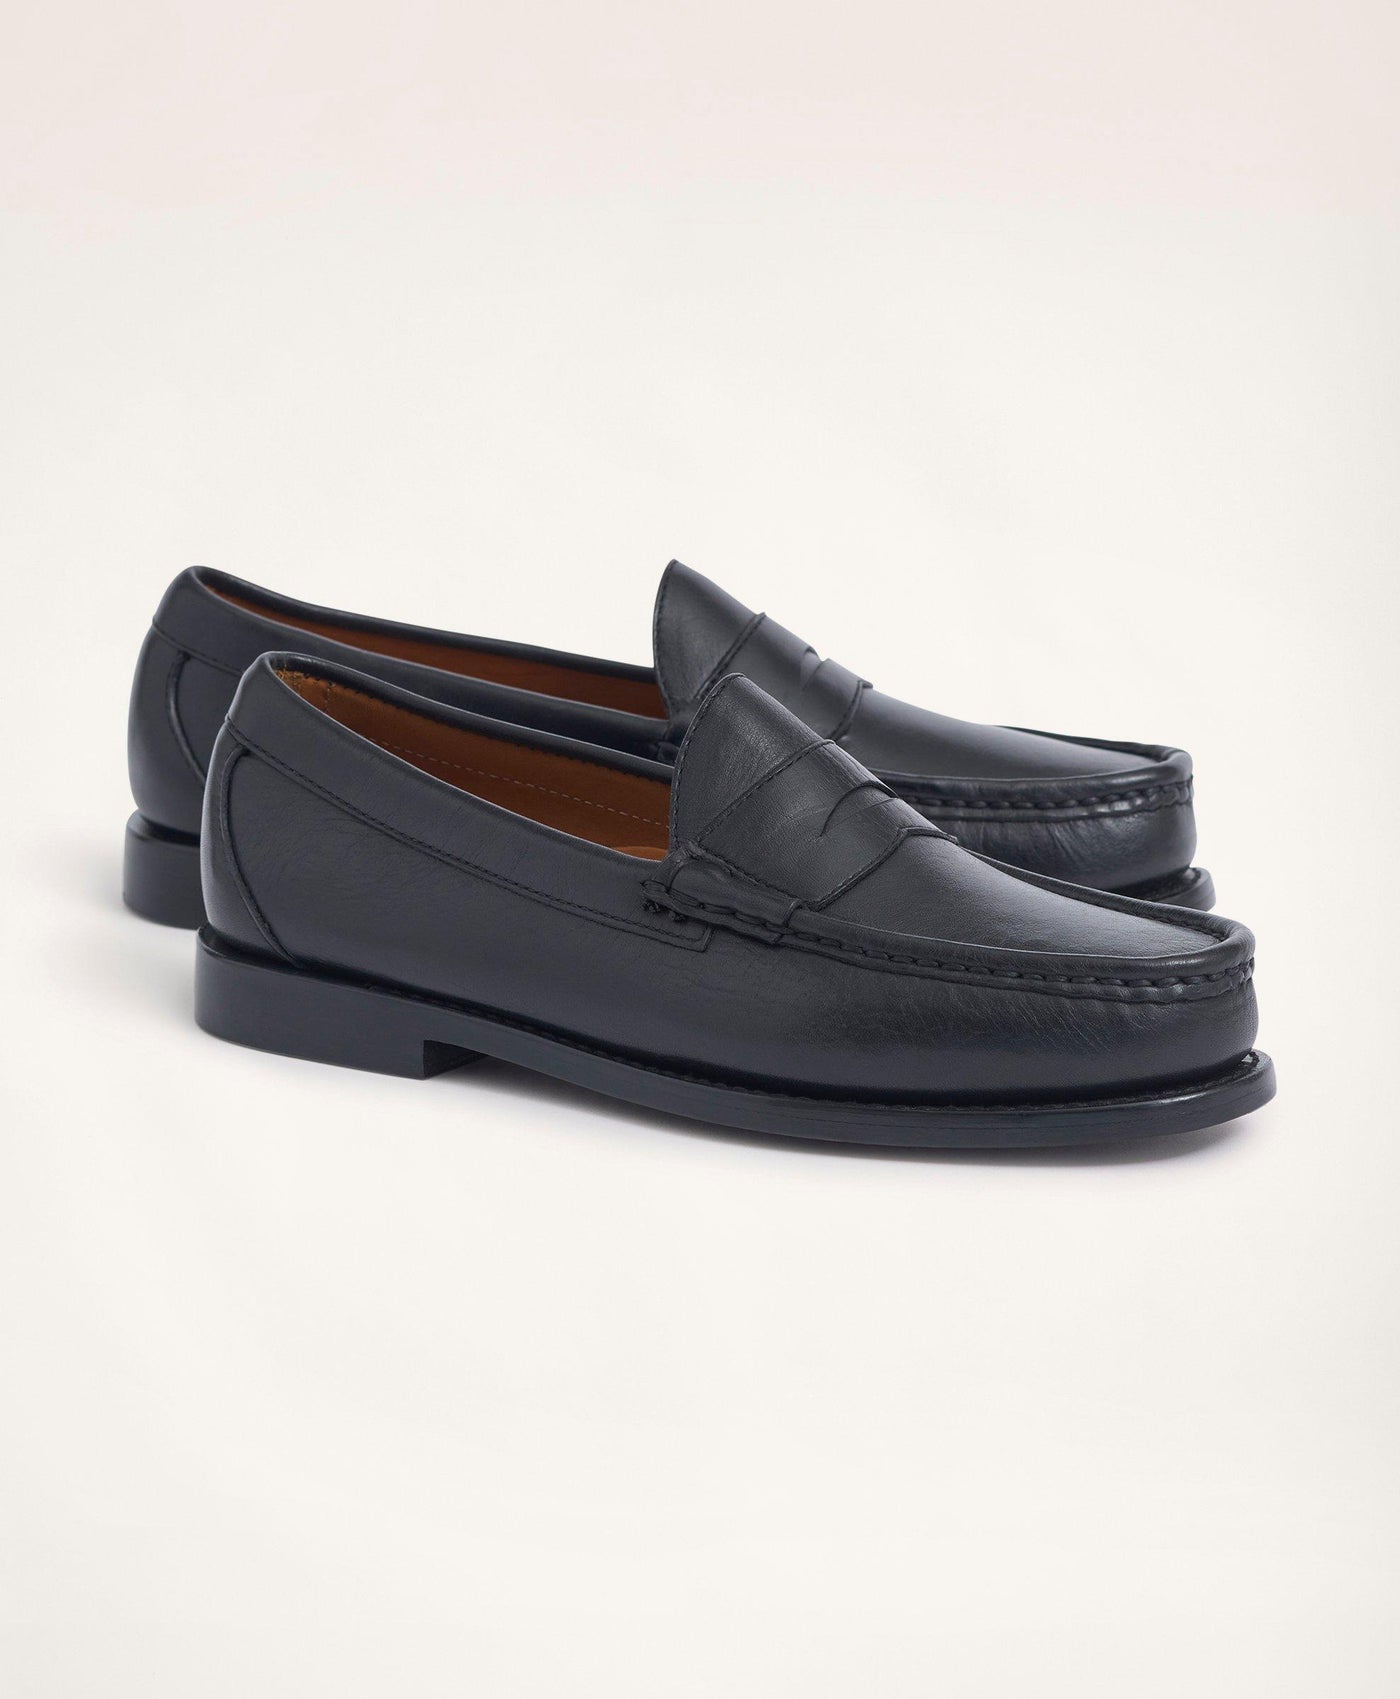 Westport Penny Loafers - Brooks Brothers Canada